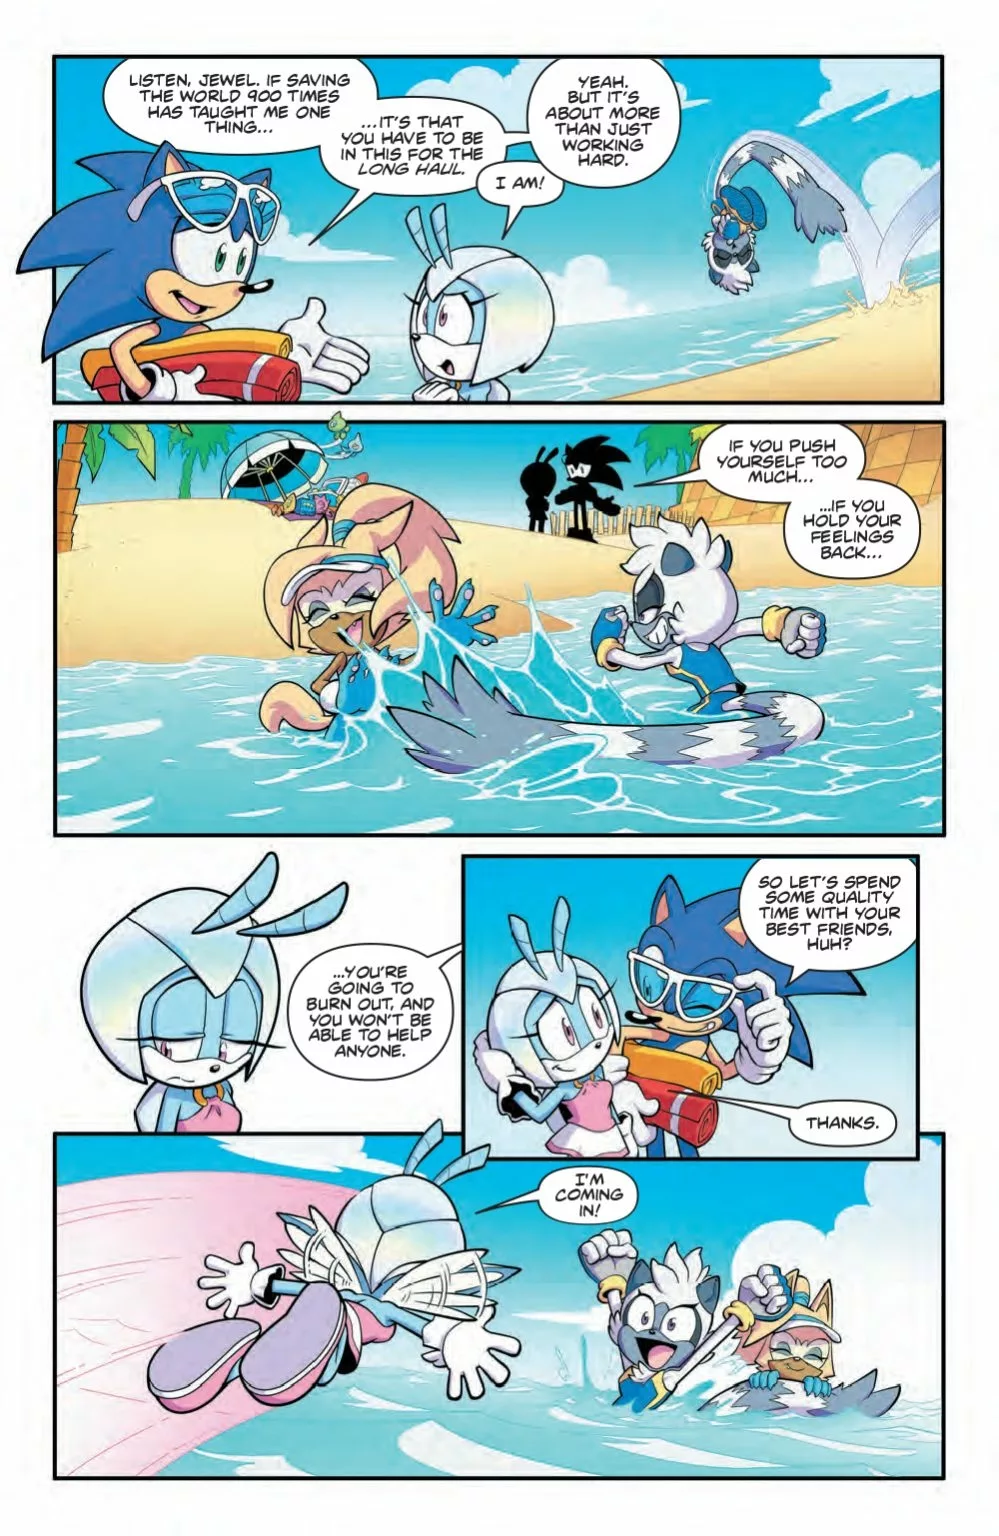 IDW Endless Summer Sonic the Hedgehog 1 Comic Book Preview